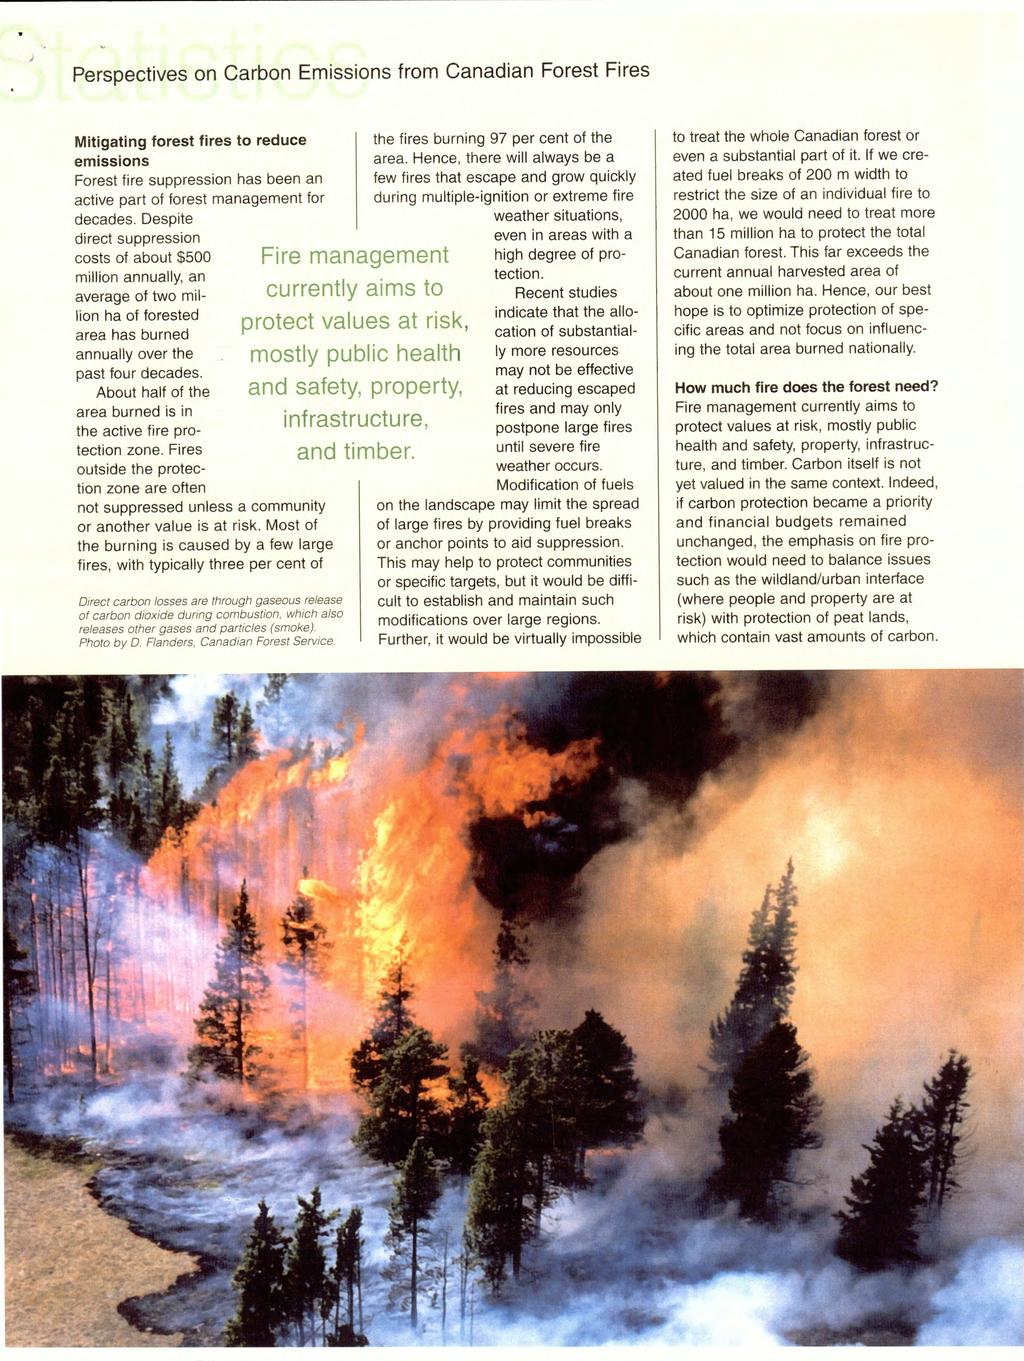 Perspectives on Carbon Emissions from Canadian Forest Fires Mitigating forest fires to reduce emissions Forest fire suppression has been an active part of forest management for decades.